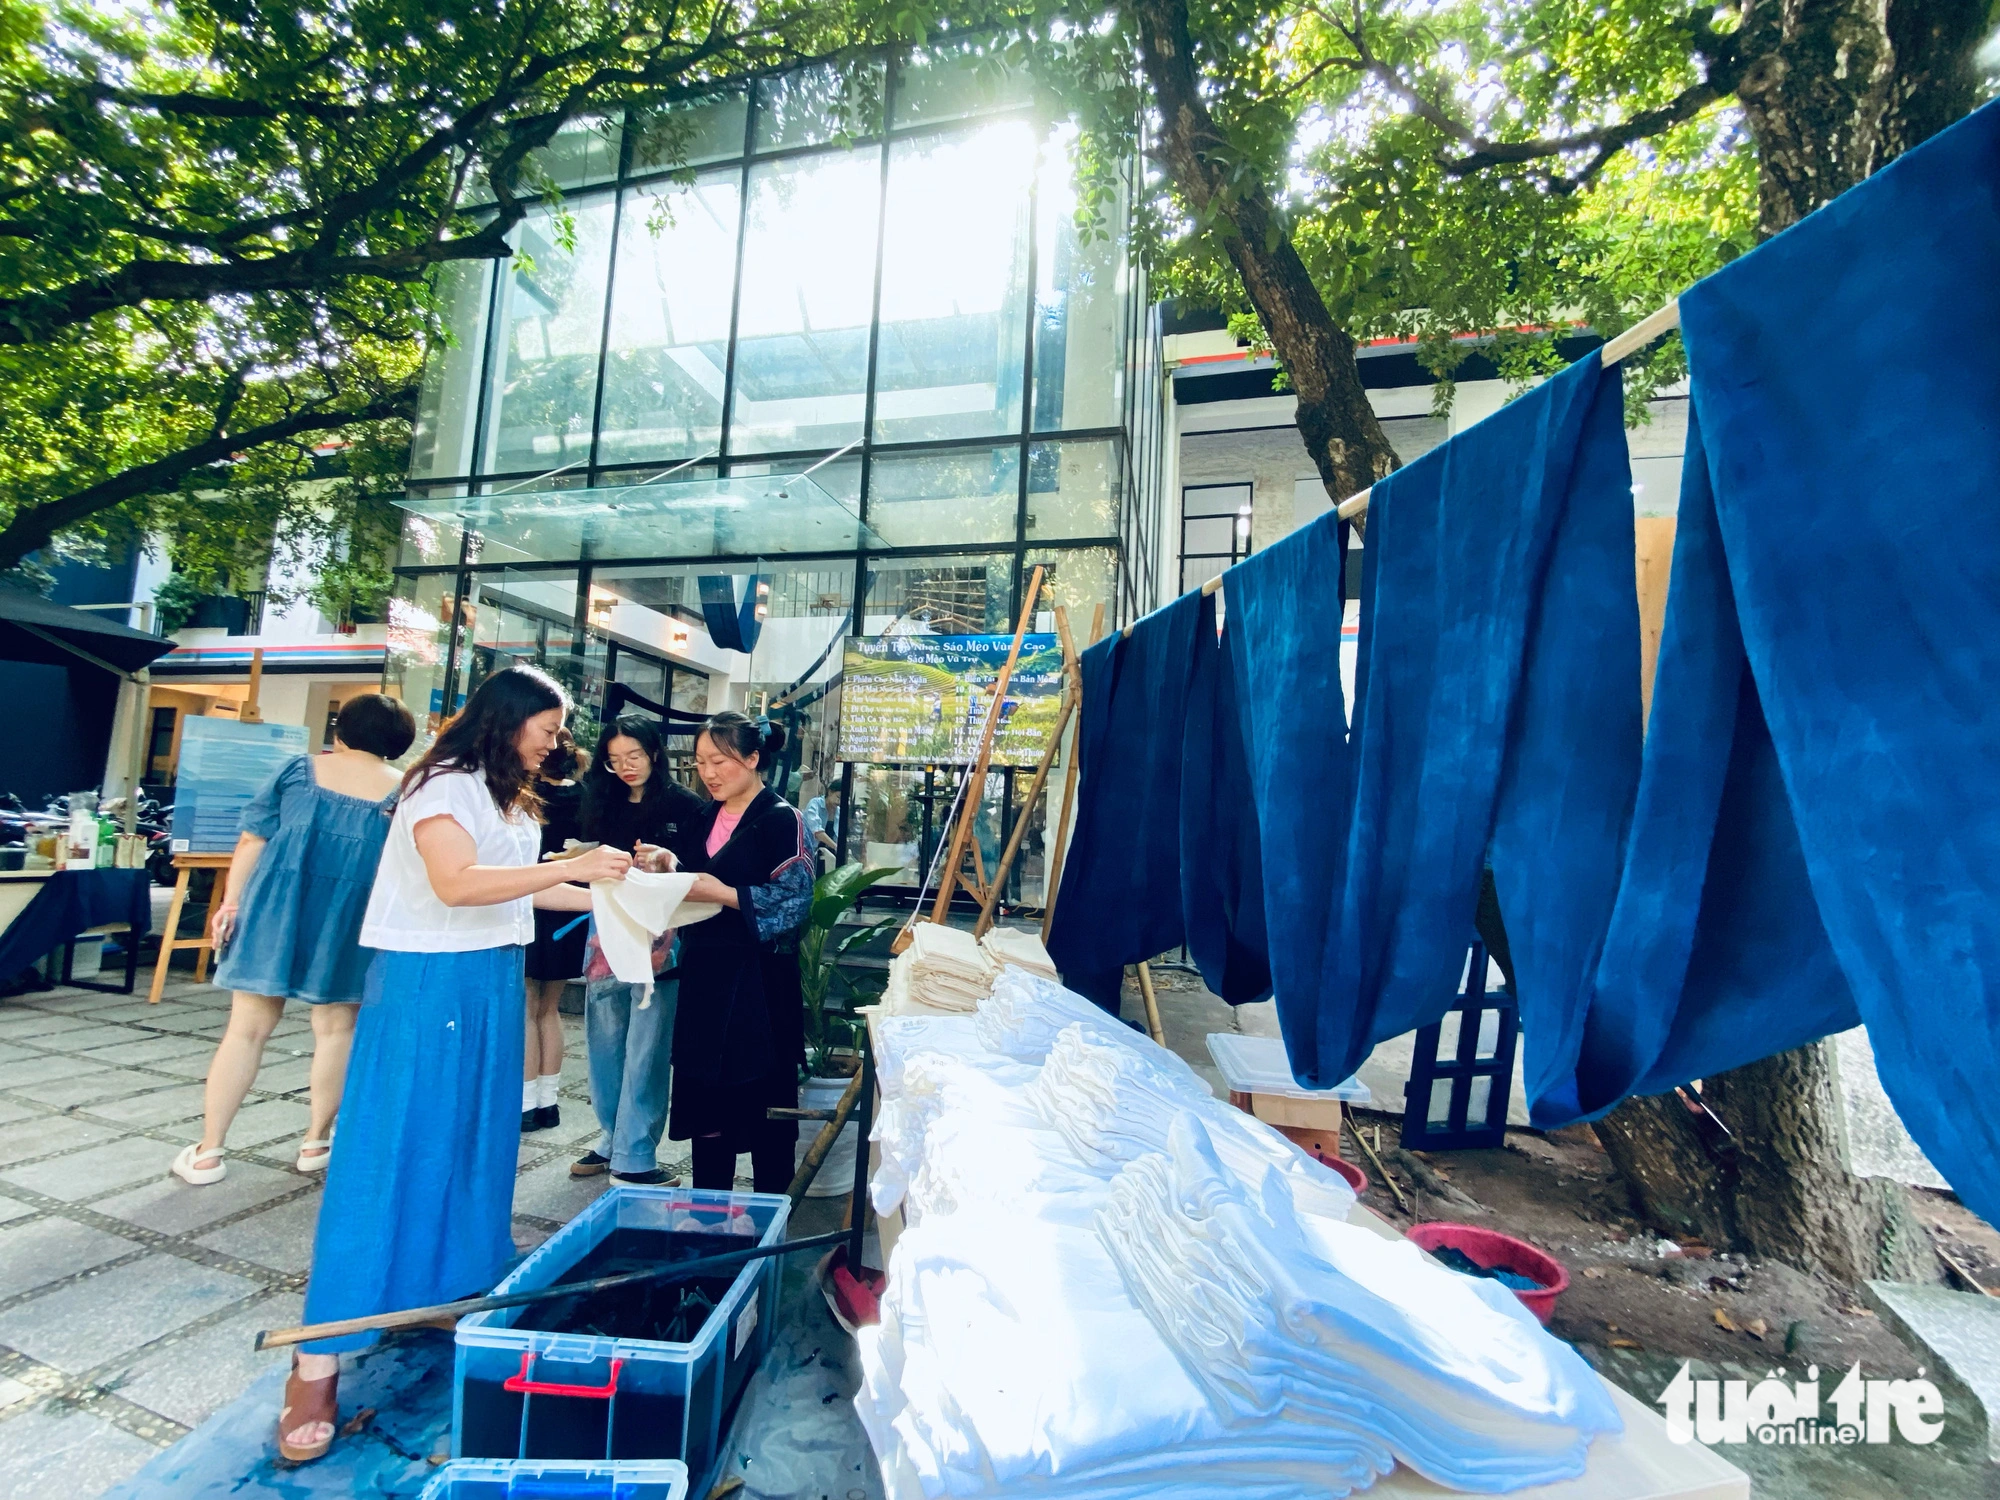 The experience of dyeing clothes with Nile water is an activity that many tourists are curious about - Photo: Nguyen Hien